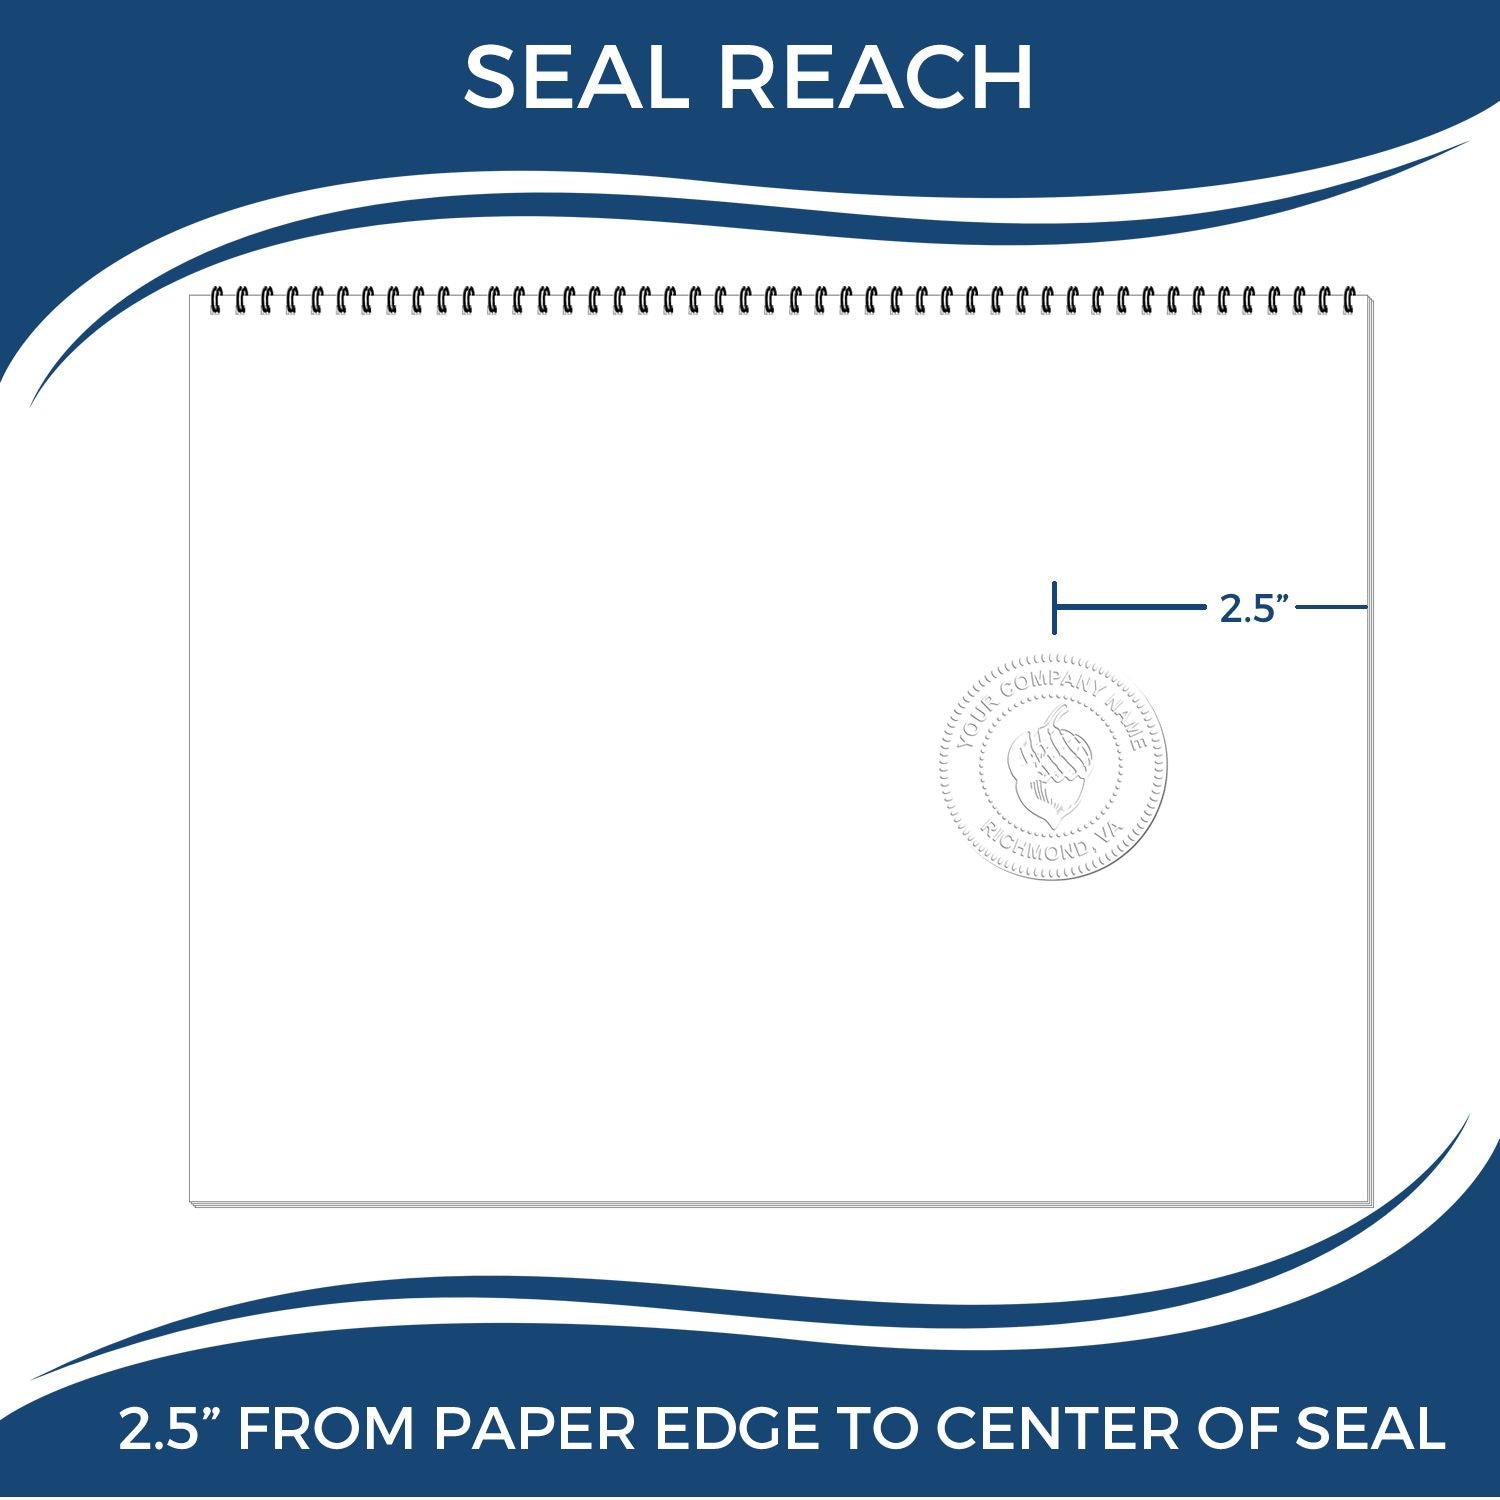 An infographic showing the seal reach which is represented by a ruler and a miniature seal image of the Heavy Duty Cast Iron Mississippi Architect Embosser